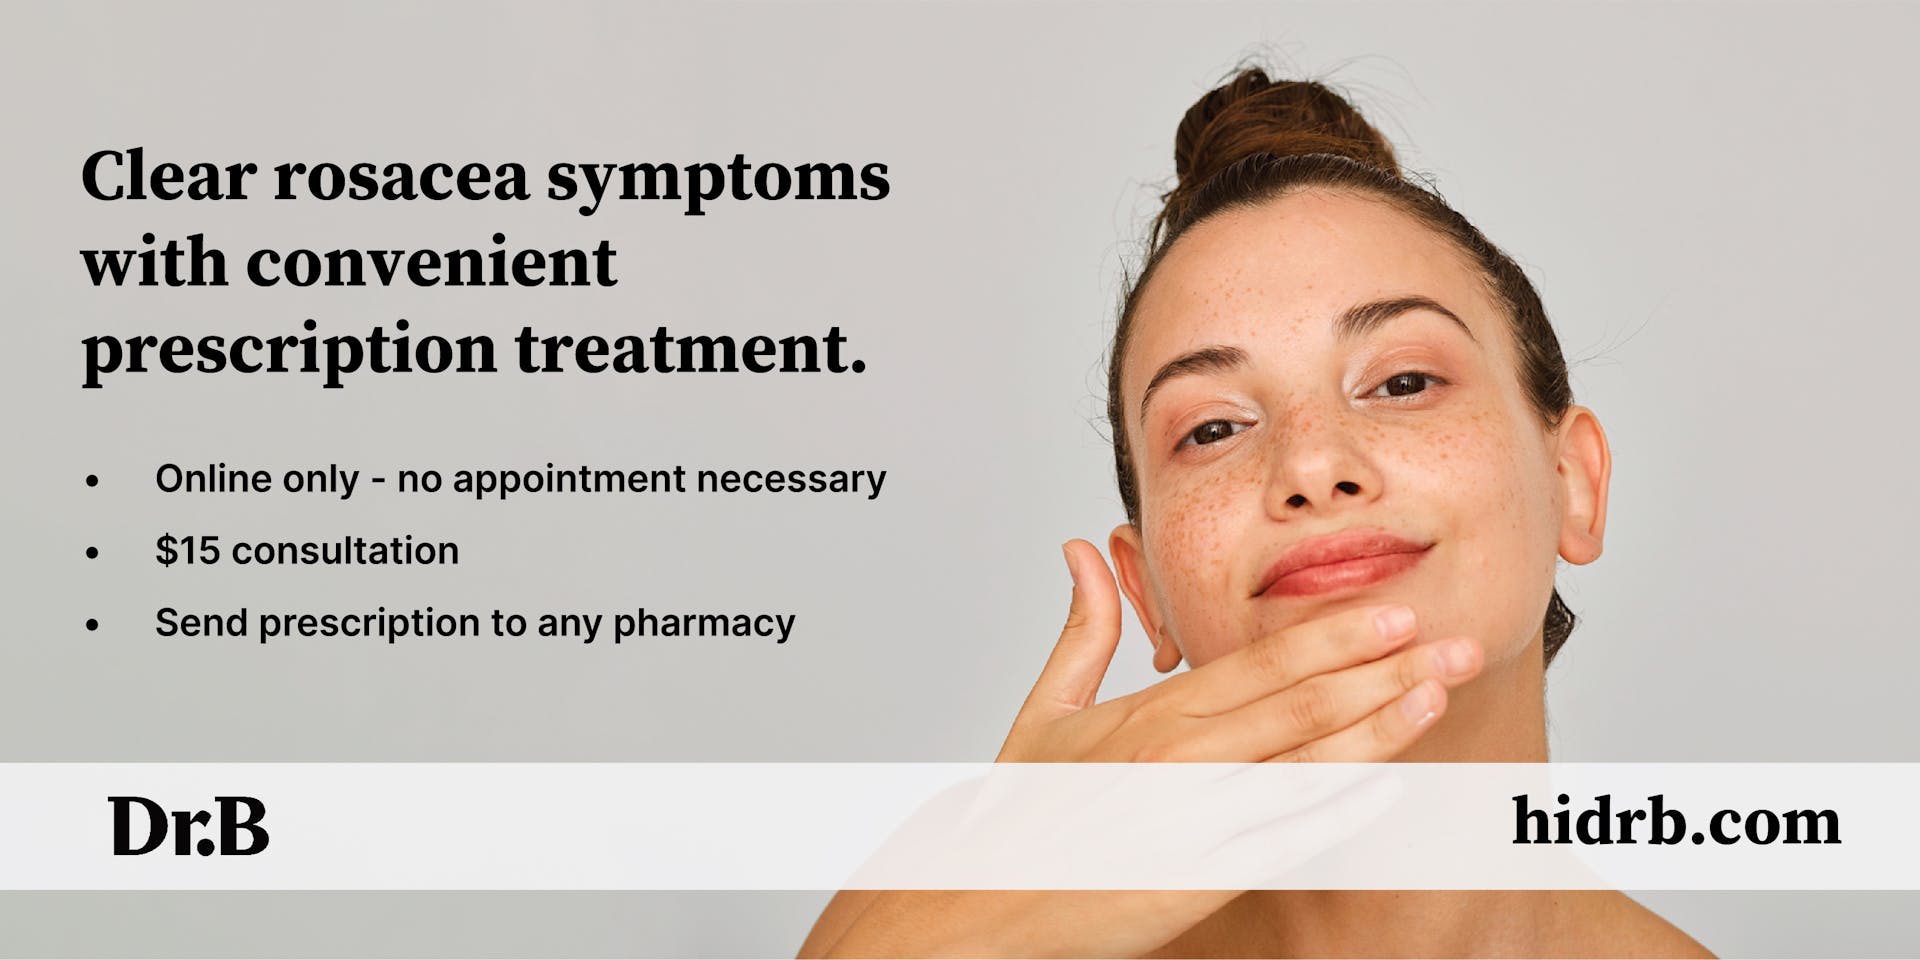 Banner advertising Dr. B's services for rosacea